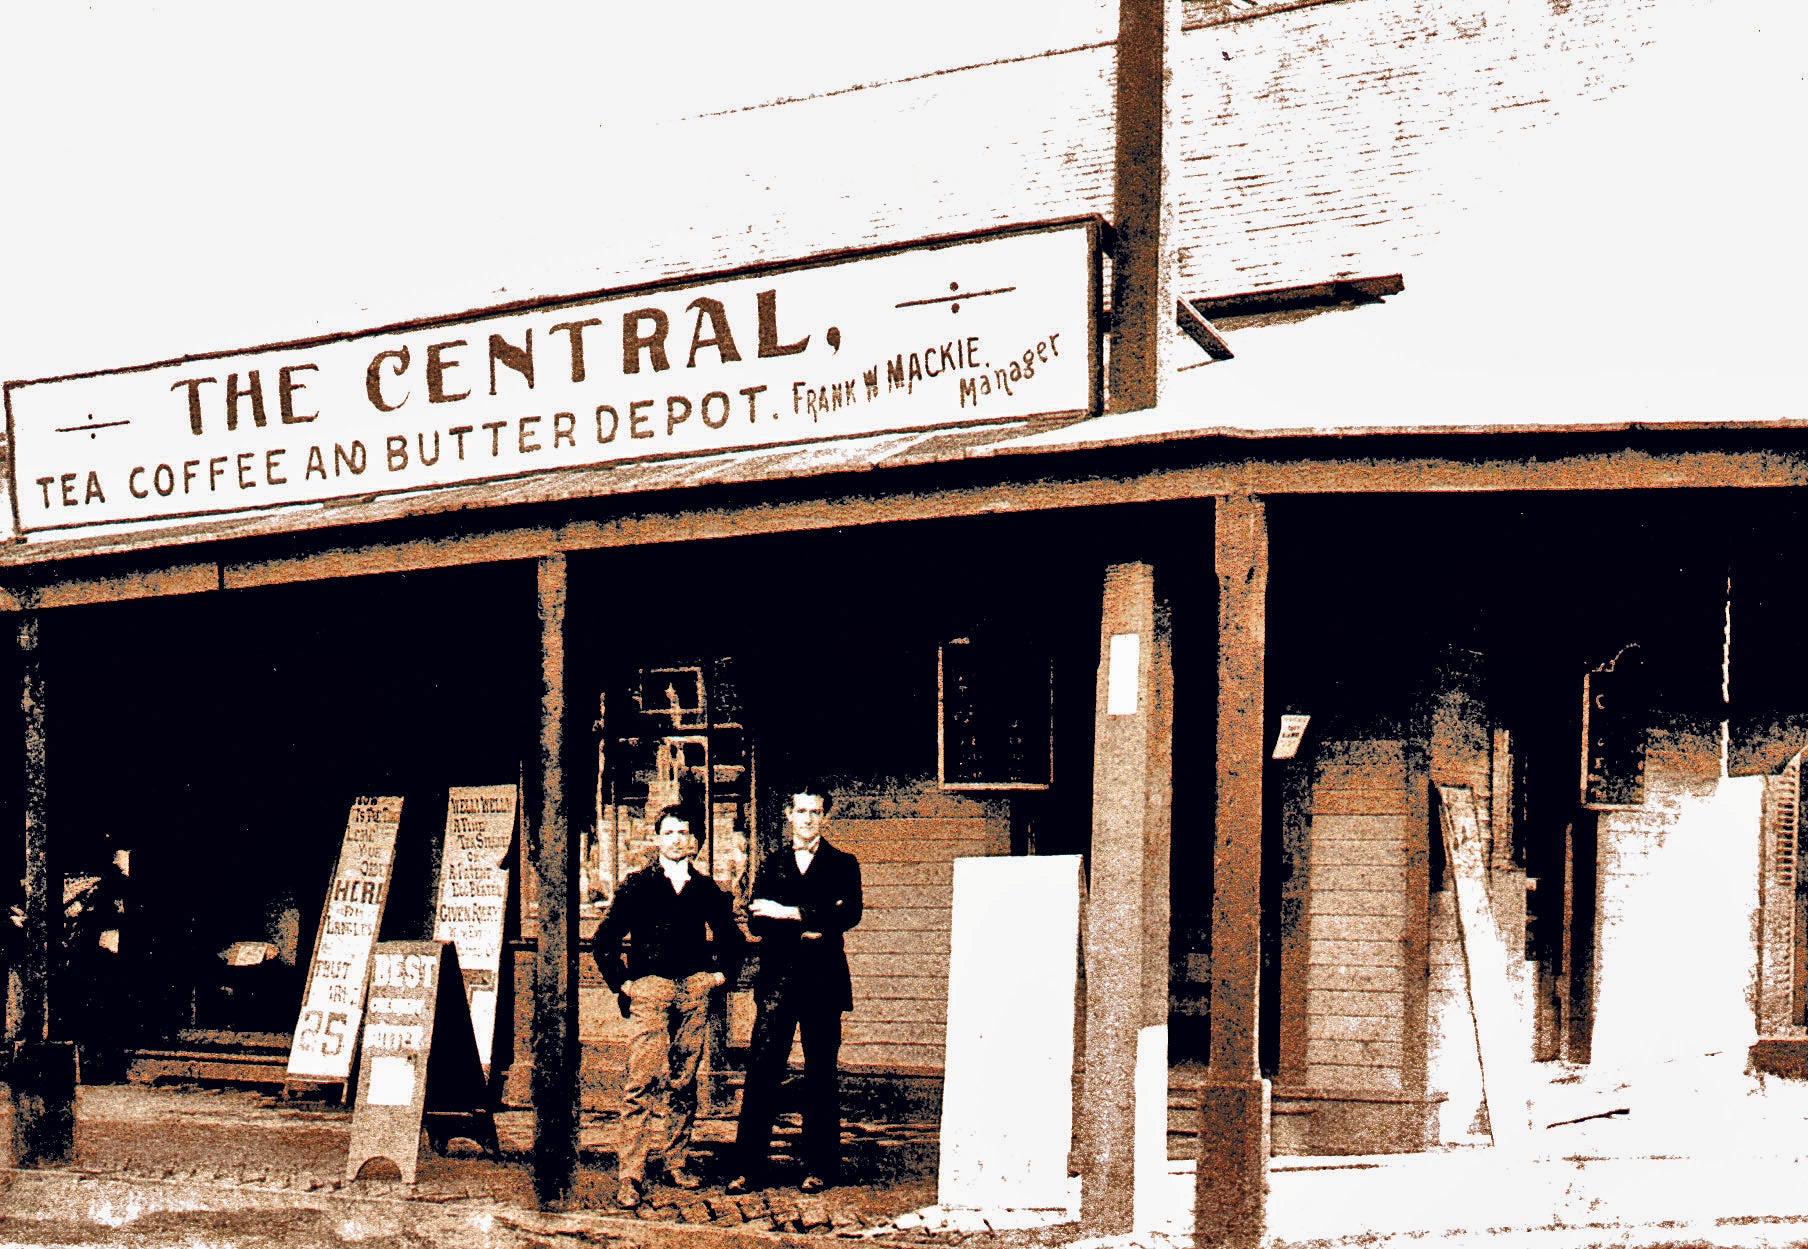 Central Coffee and Butter depot building